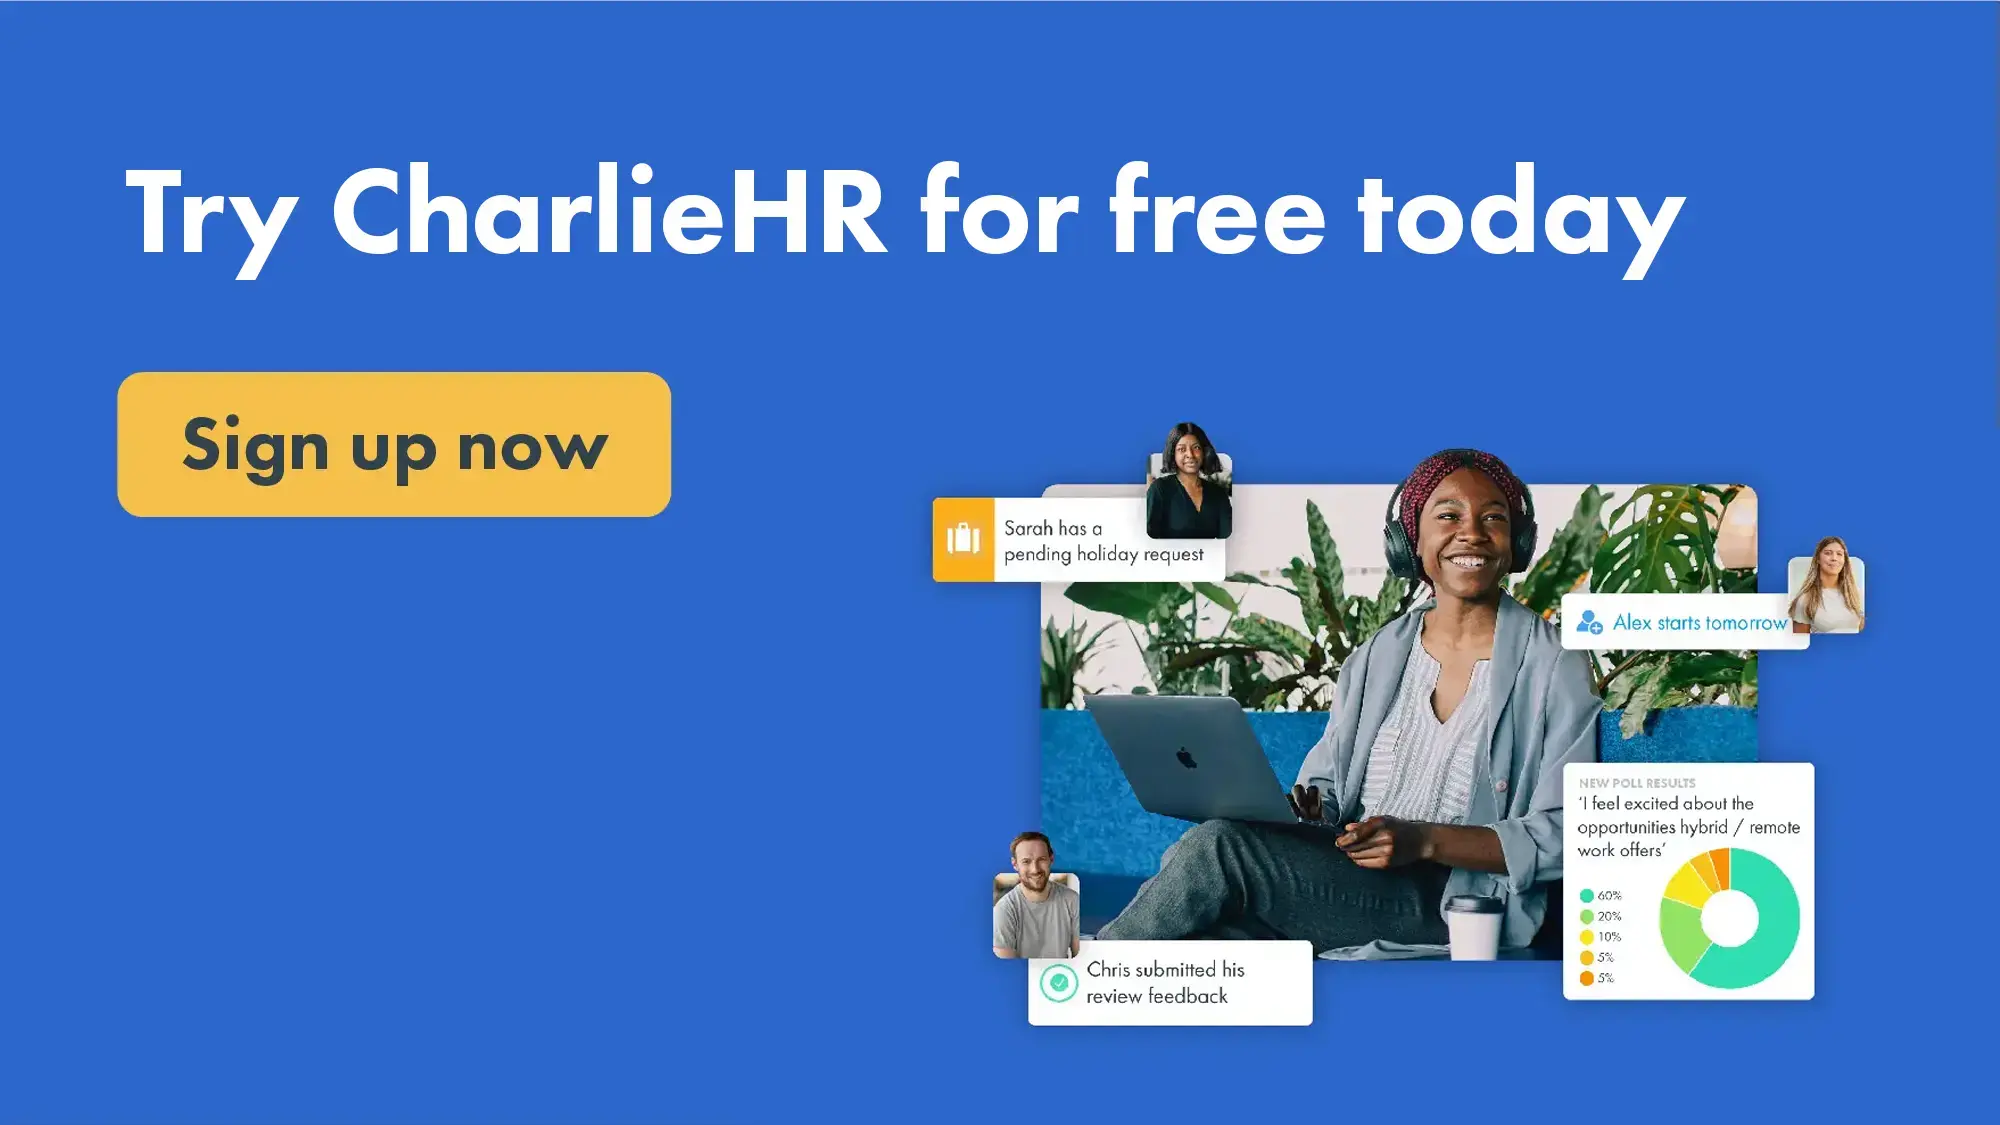 Click to start a free trial of CharlieHR